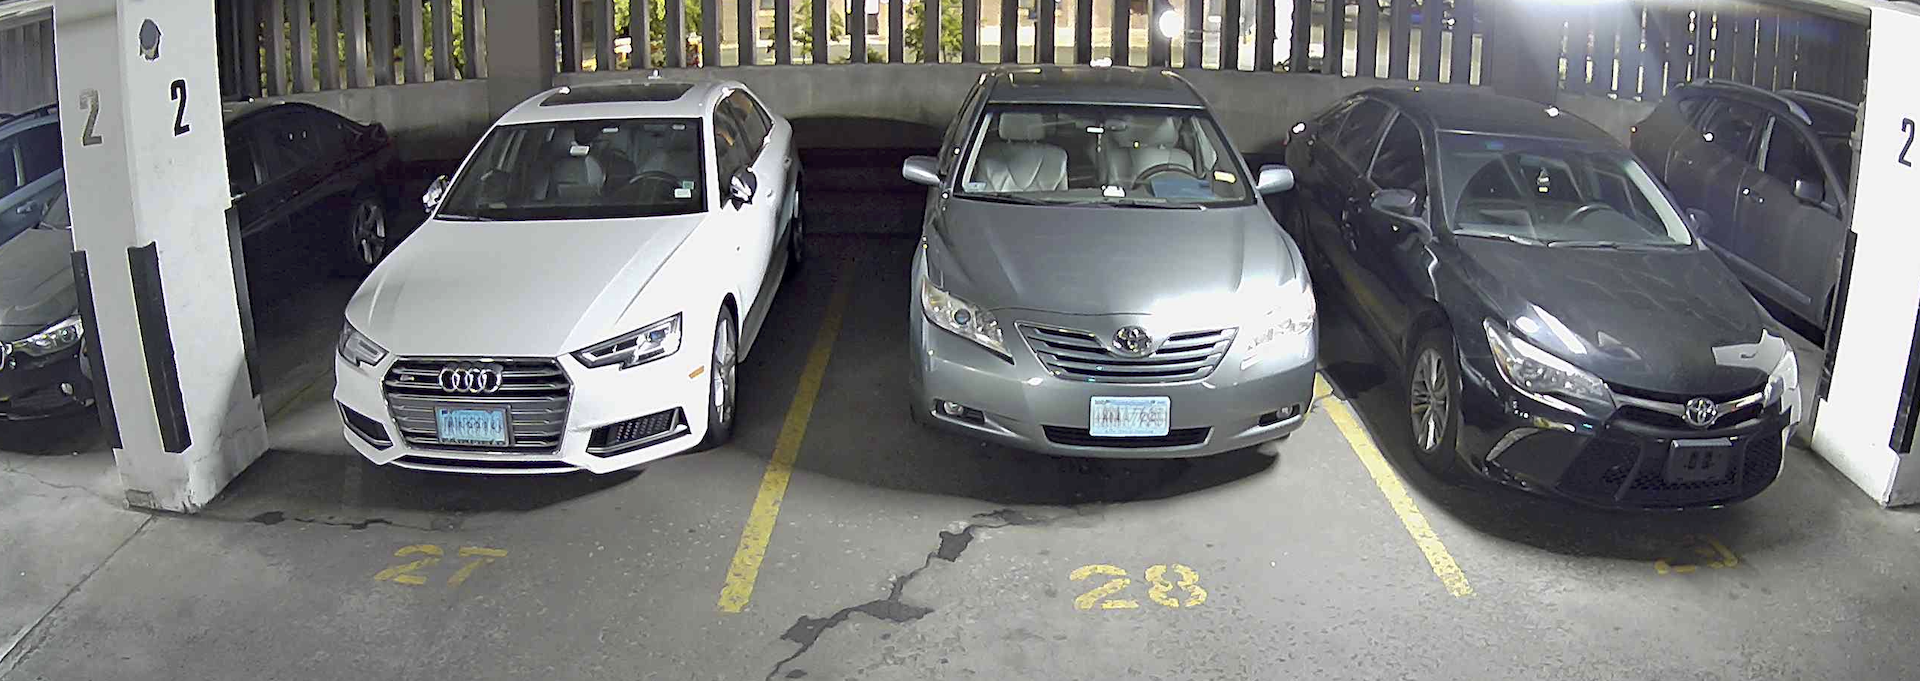 Parking garage owners and operators can enhance surveillance using the HD streaming video from the camera based M5 smart sensor video feed in an automated parking guidance system (APGS)